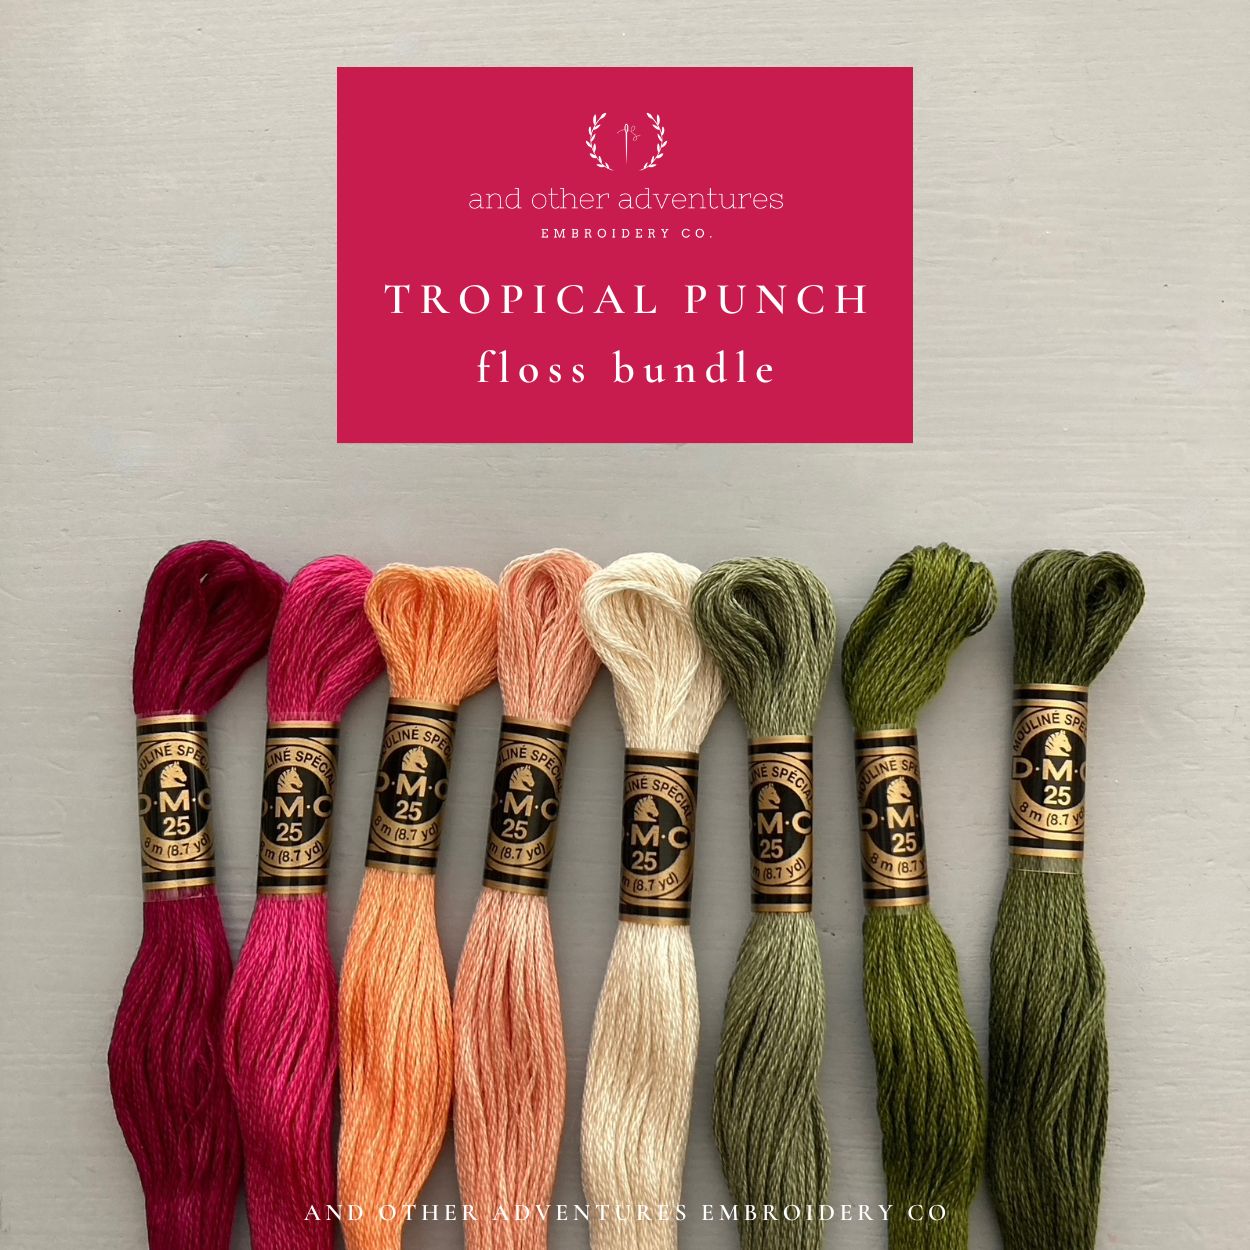 This Tropical Punch embroidery DMC floss bundle is bursting with color! 8 curated thread colors by And Other Adventures Embroidery Co